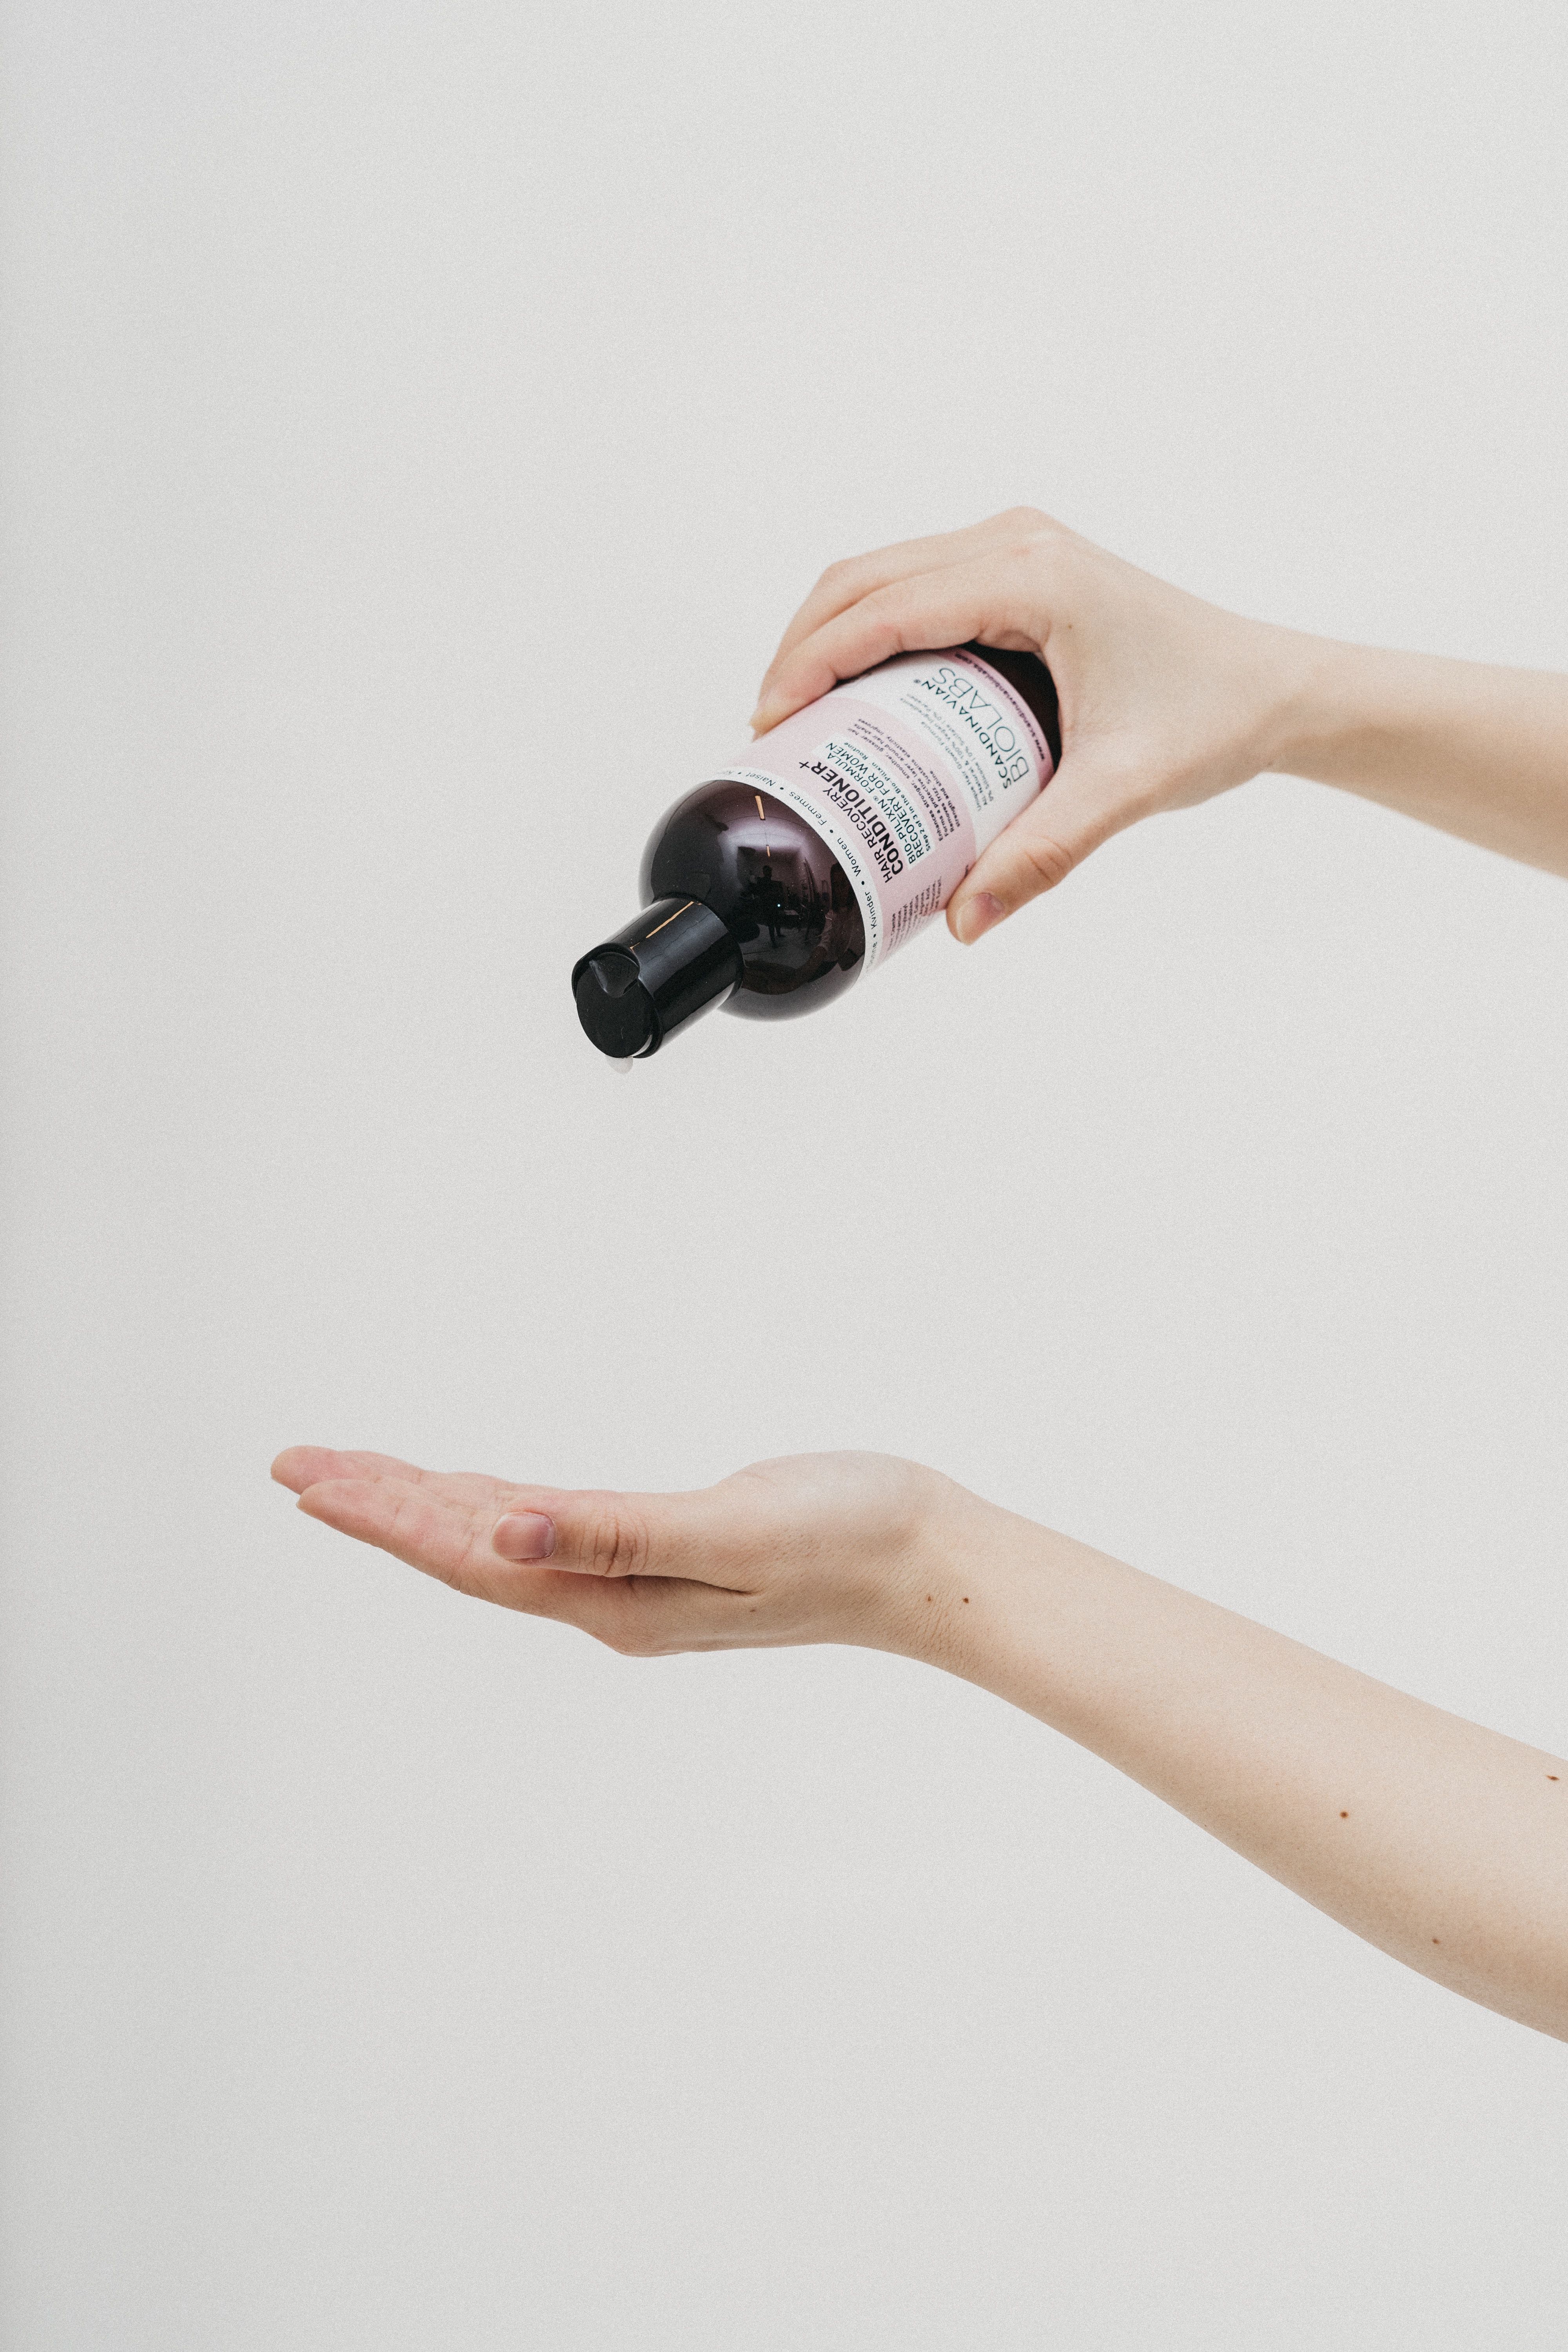 All about Hair Serums: How to Use & its Benefits